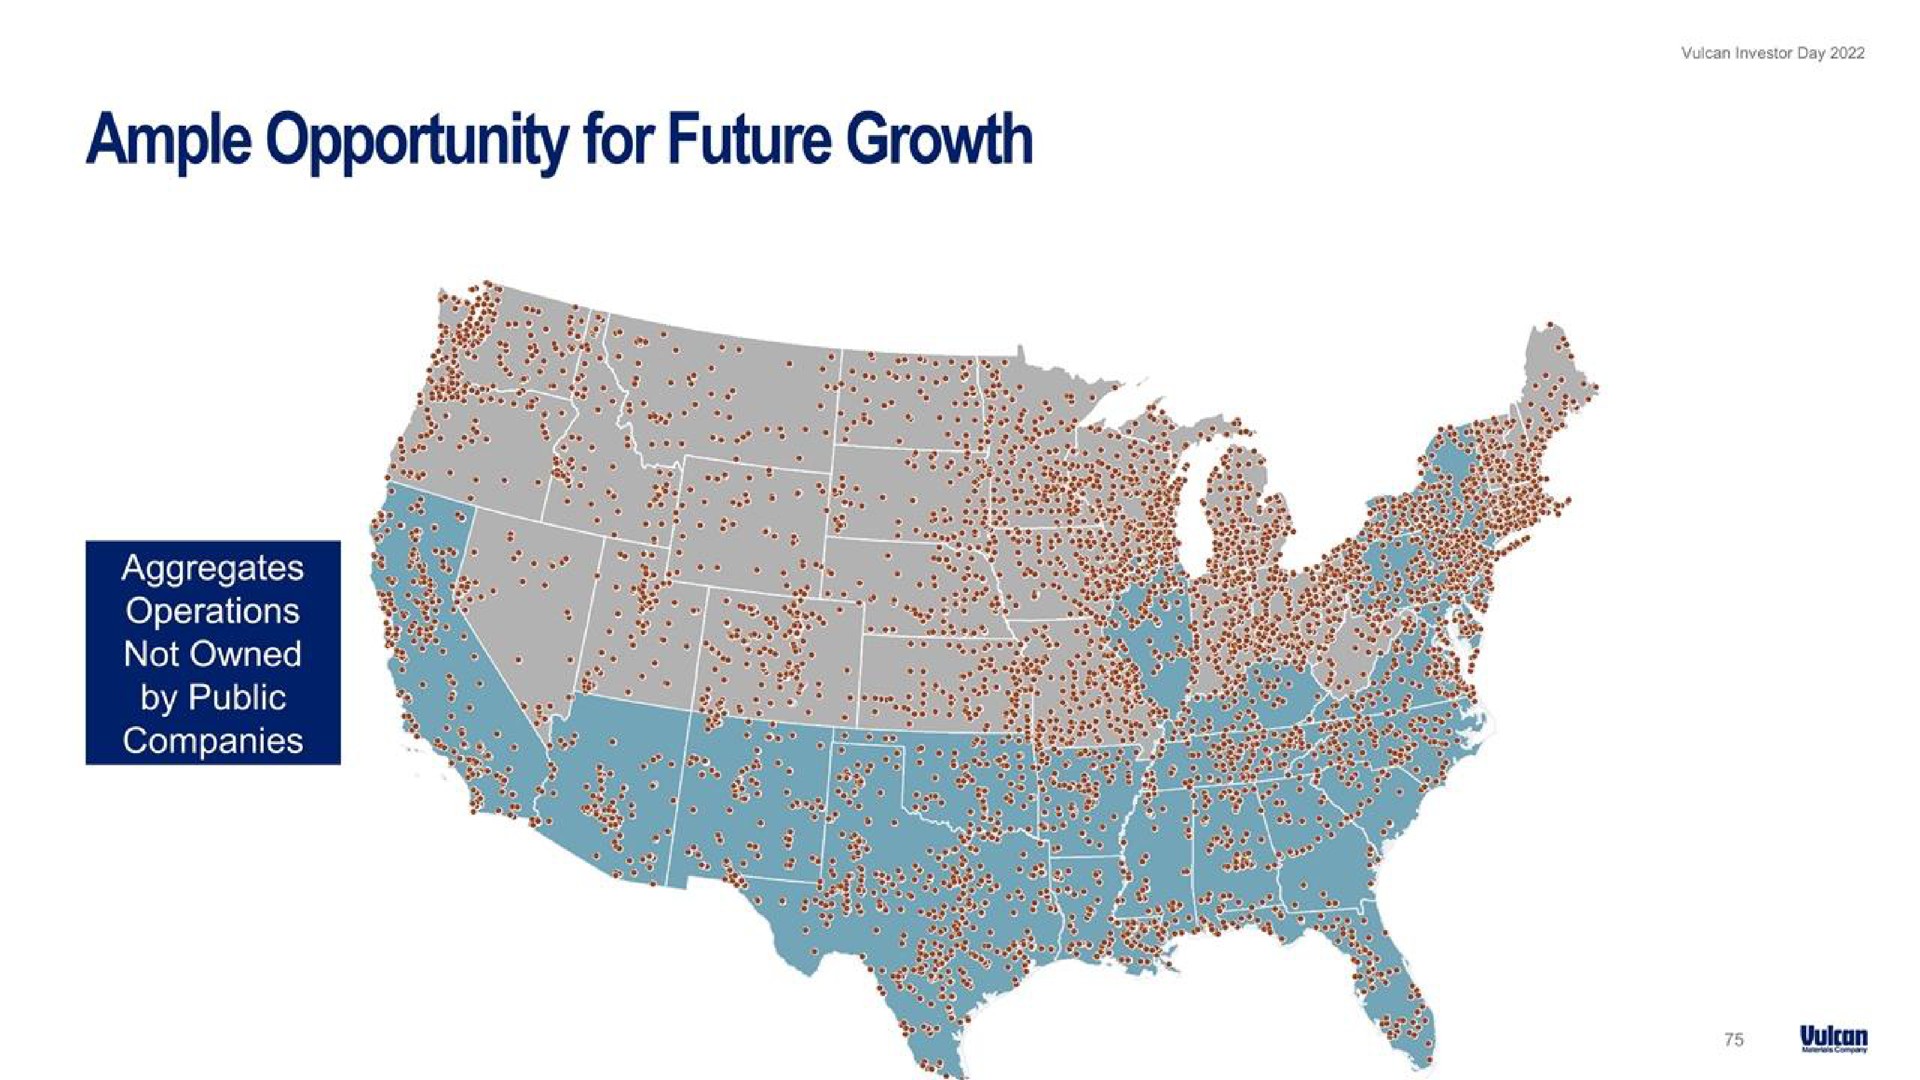 ample opportunity for future growth | Vulcan Materials